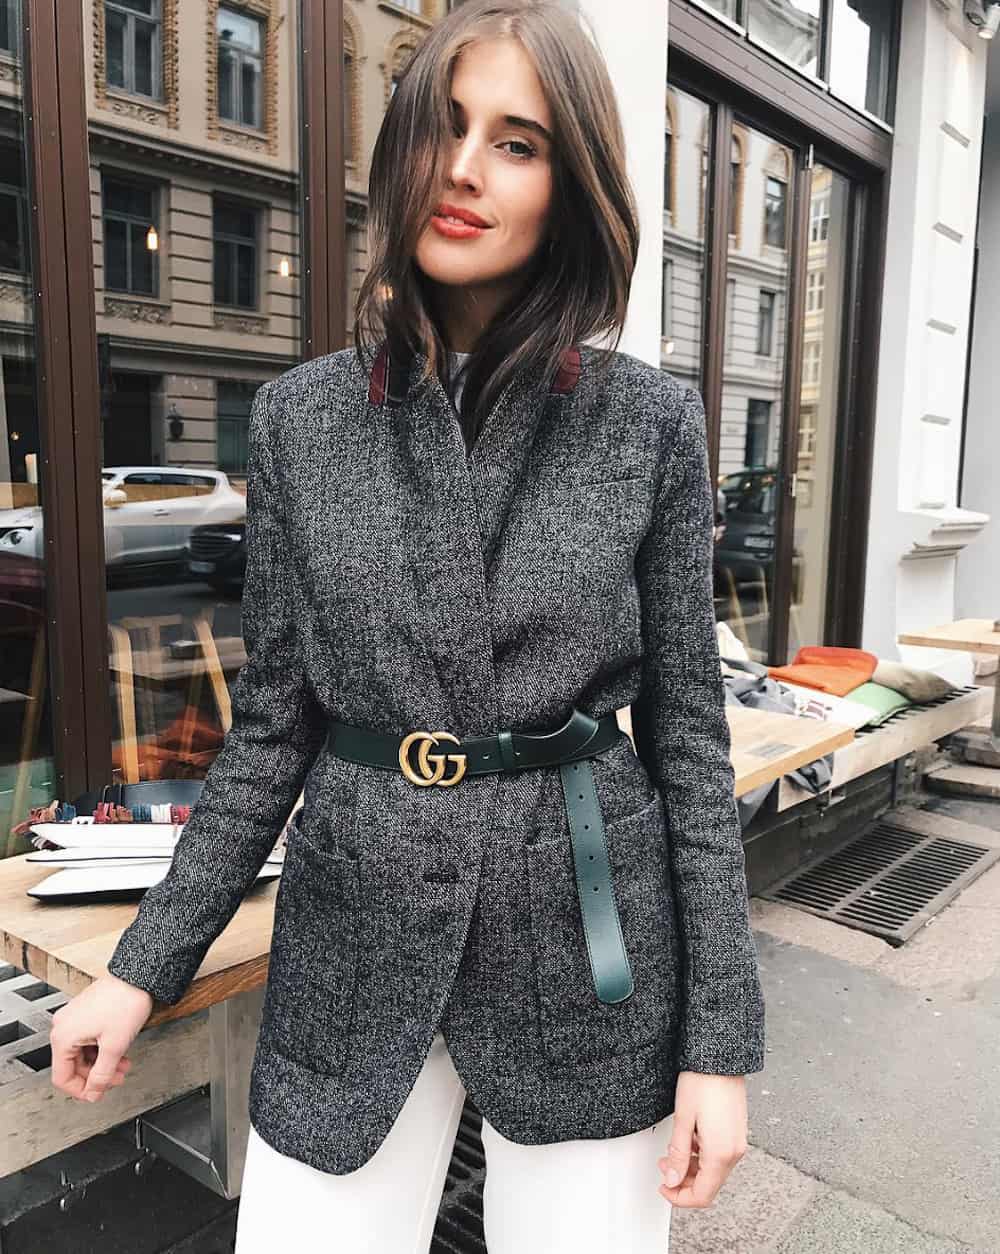 15+ Chic & Modern Gucci Belt Outfits You'll Want To Copy!